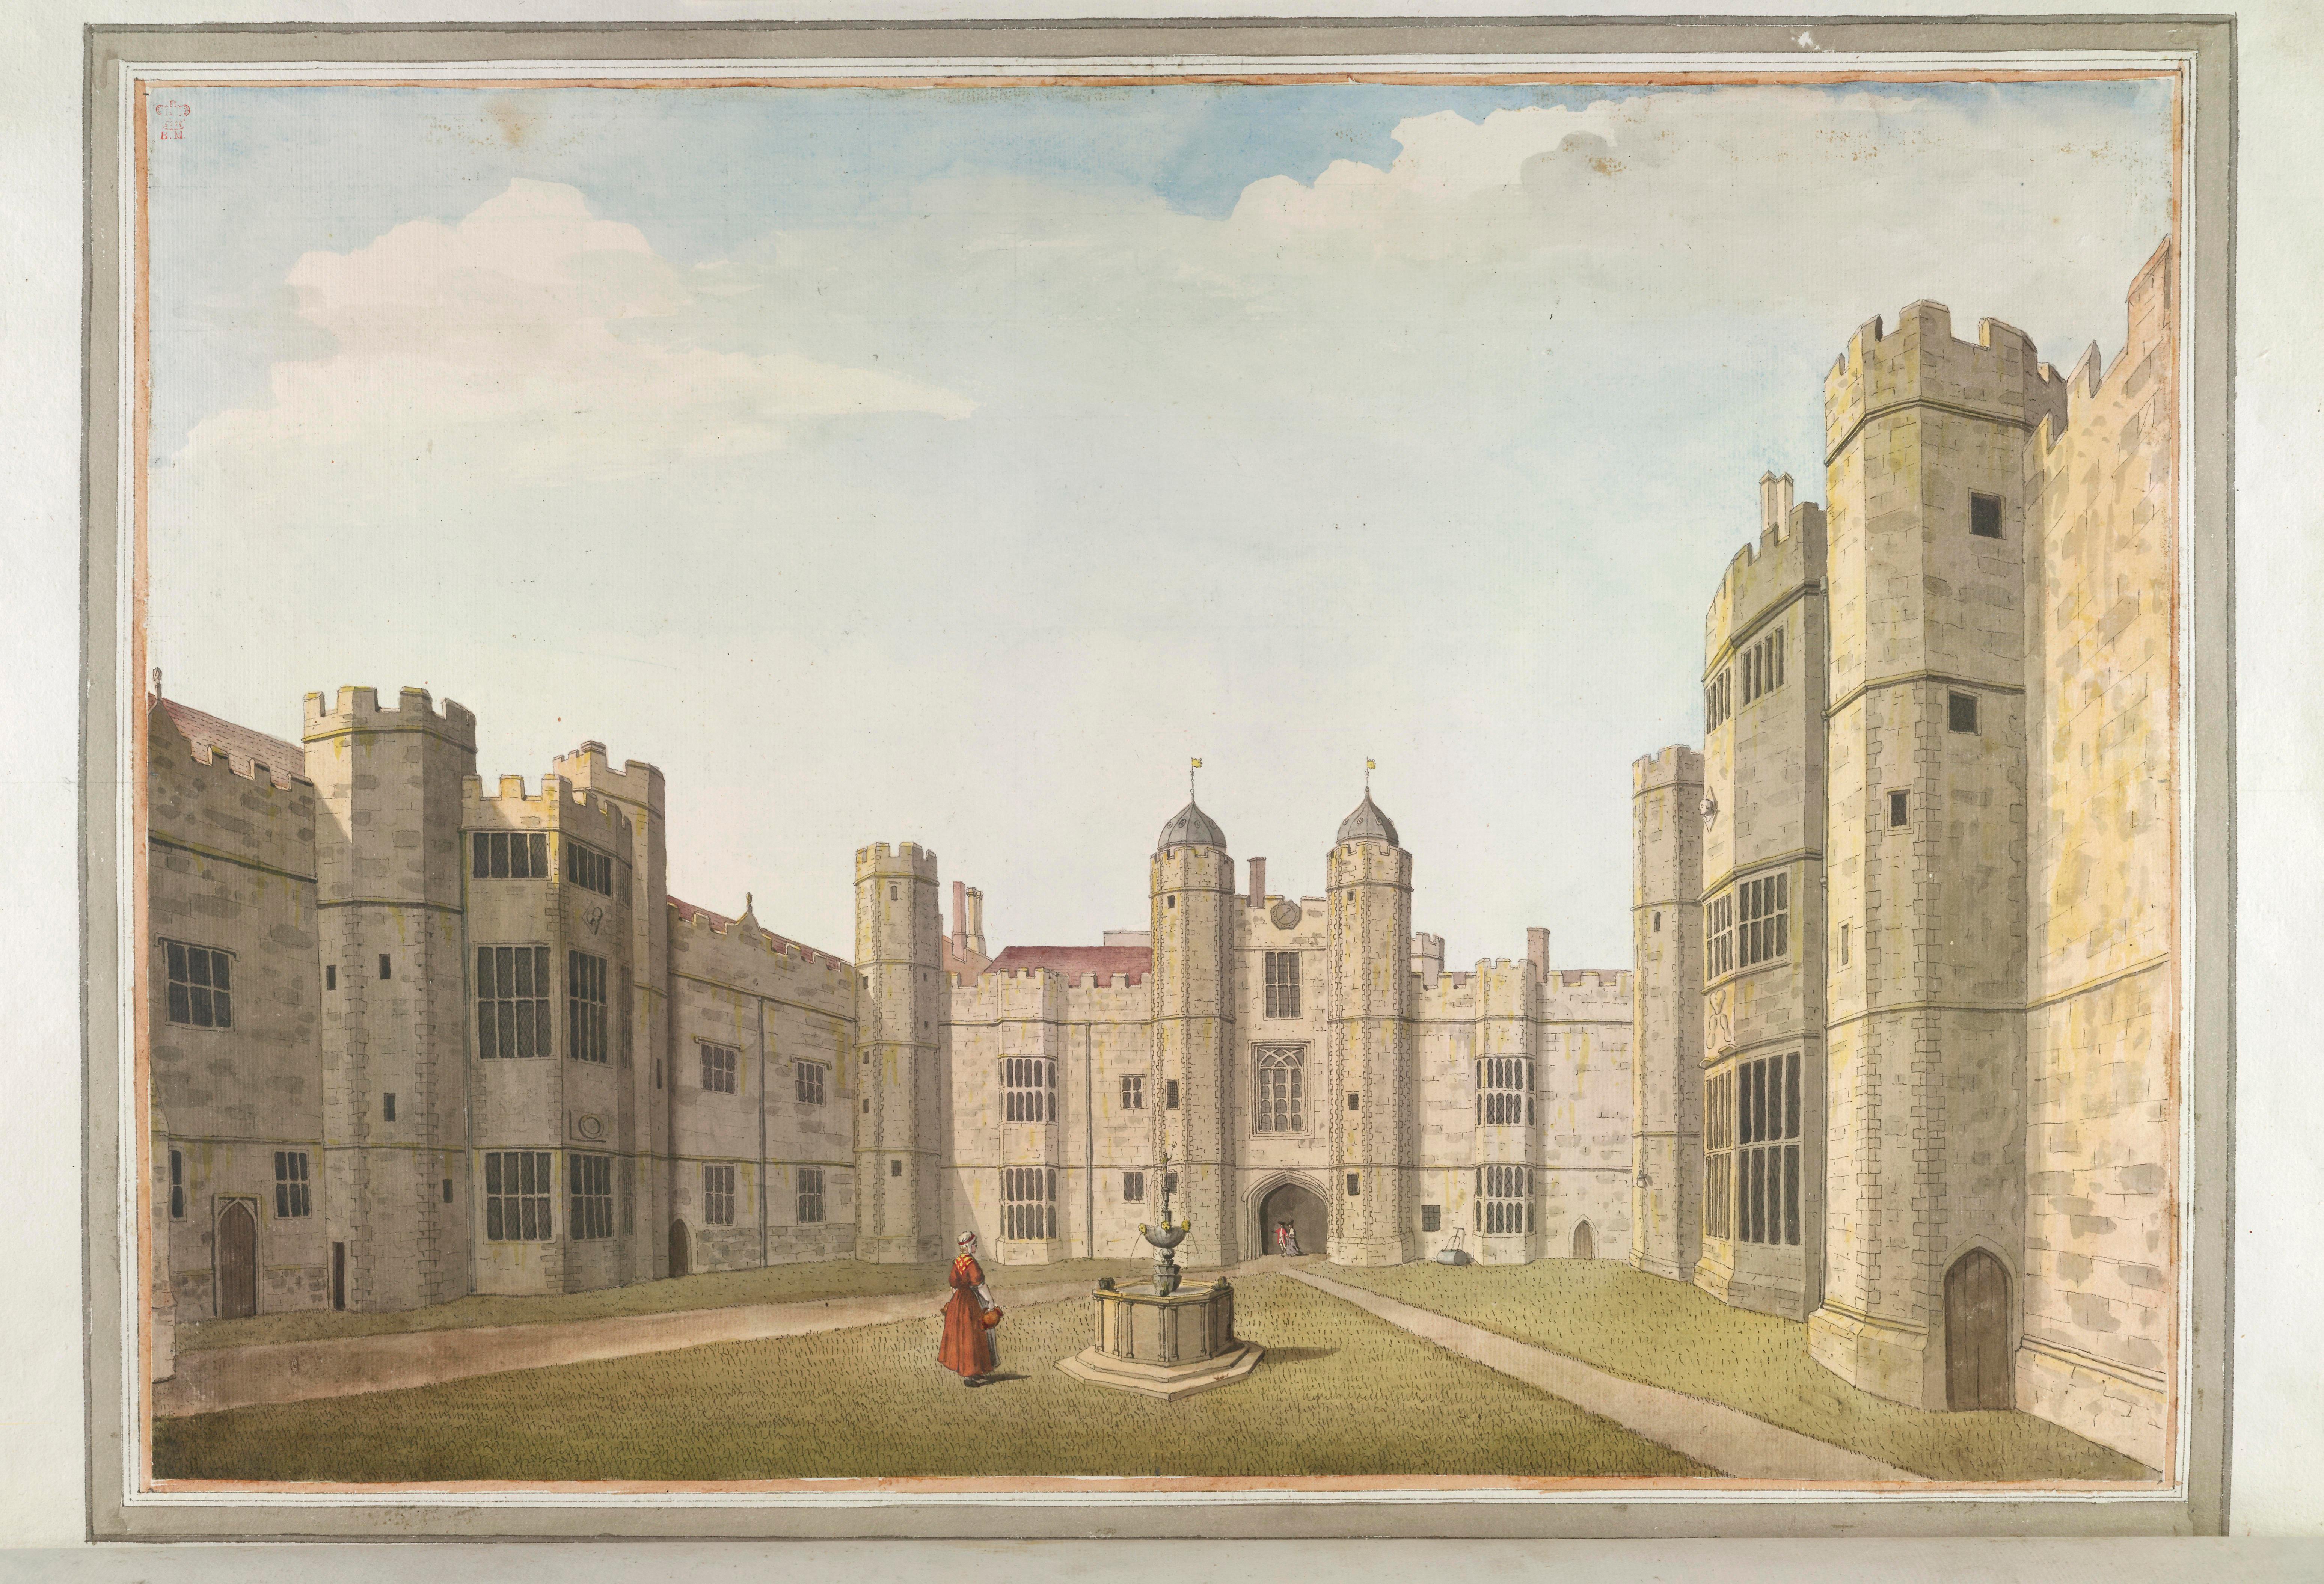 The great court at Cowdray. Grimm's Sussex Drawings. 1782. Drawn by S.H. Grimm. Image courtesy and by permission of Cowdray Estate